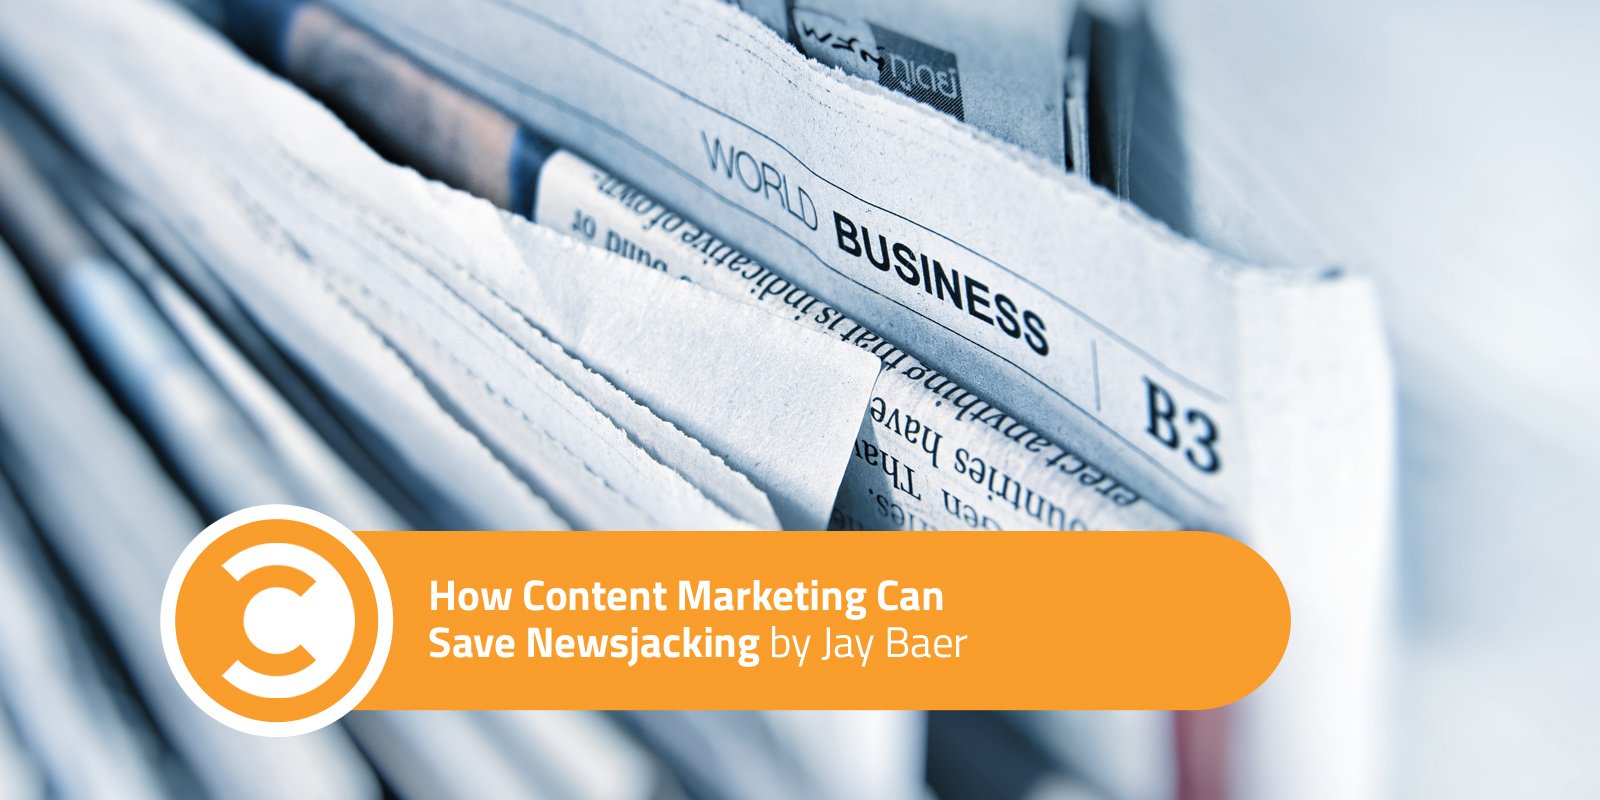 How Content Marketing Can Save Newsjacking